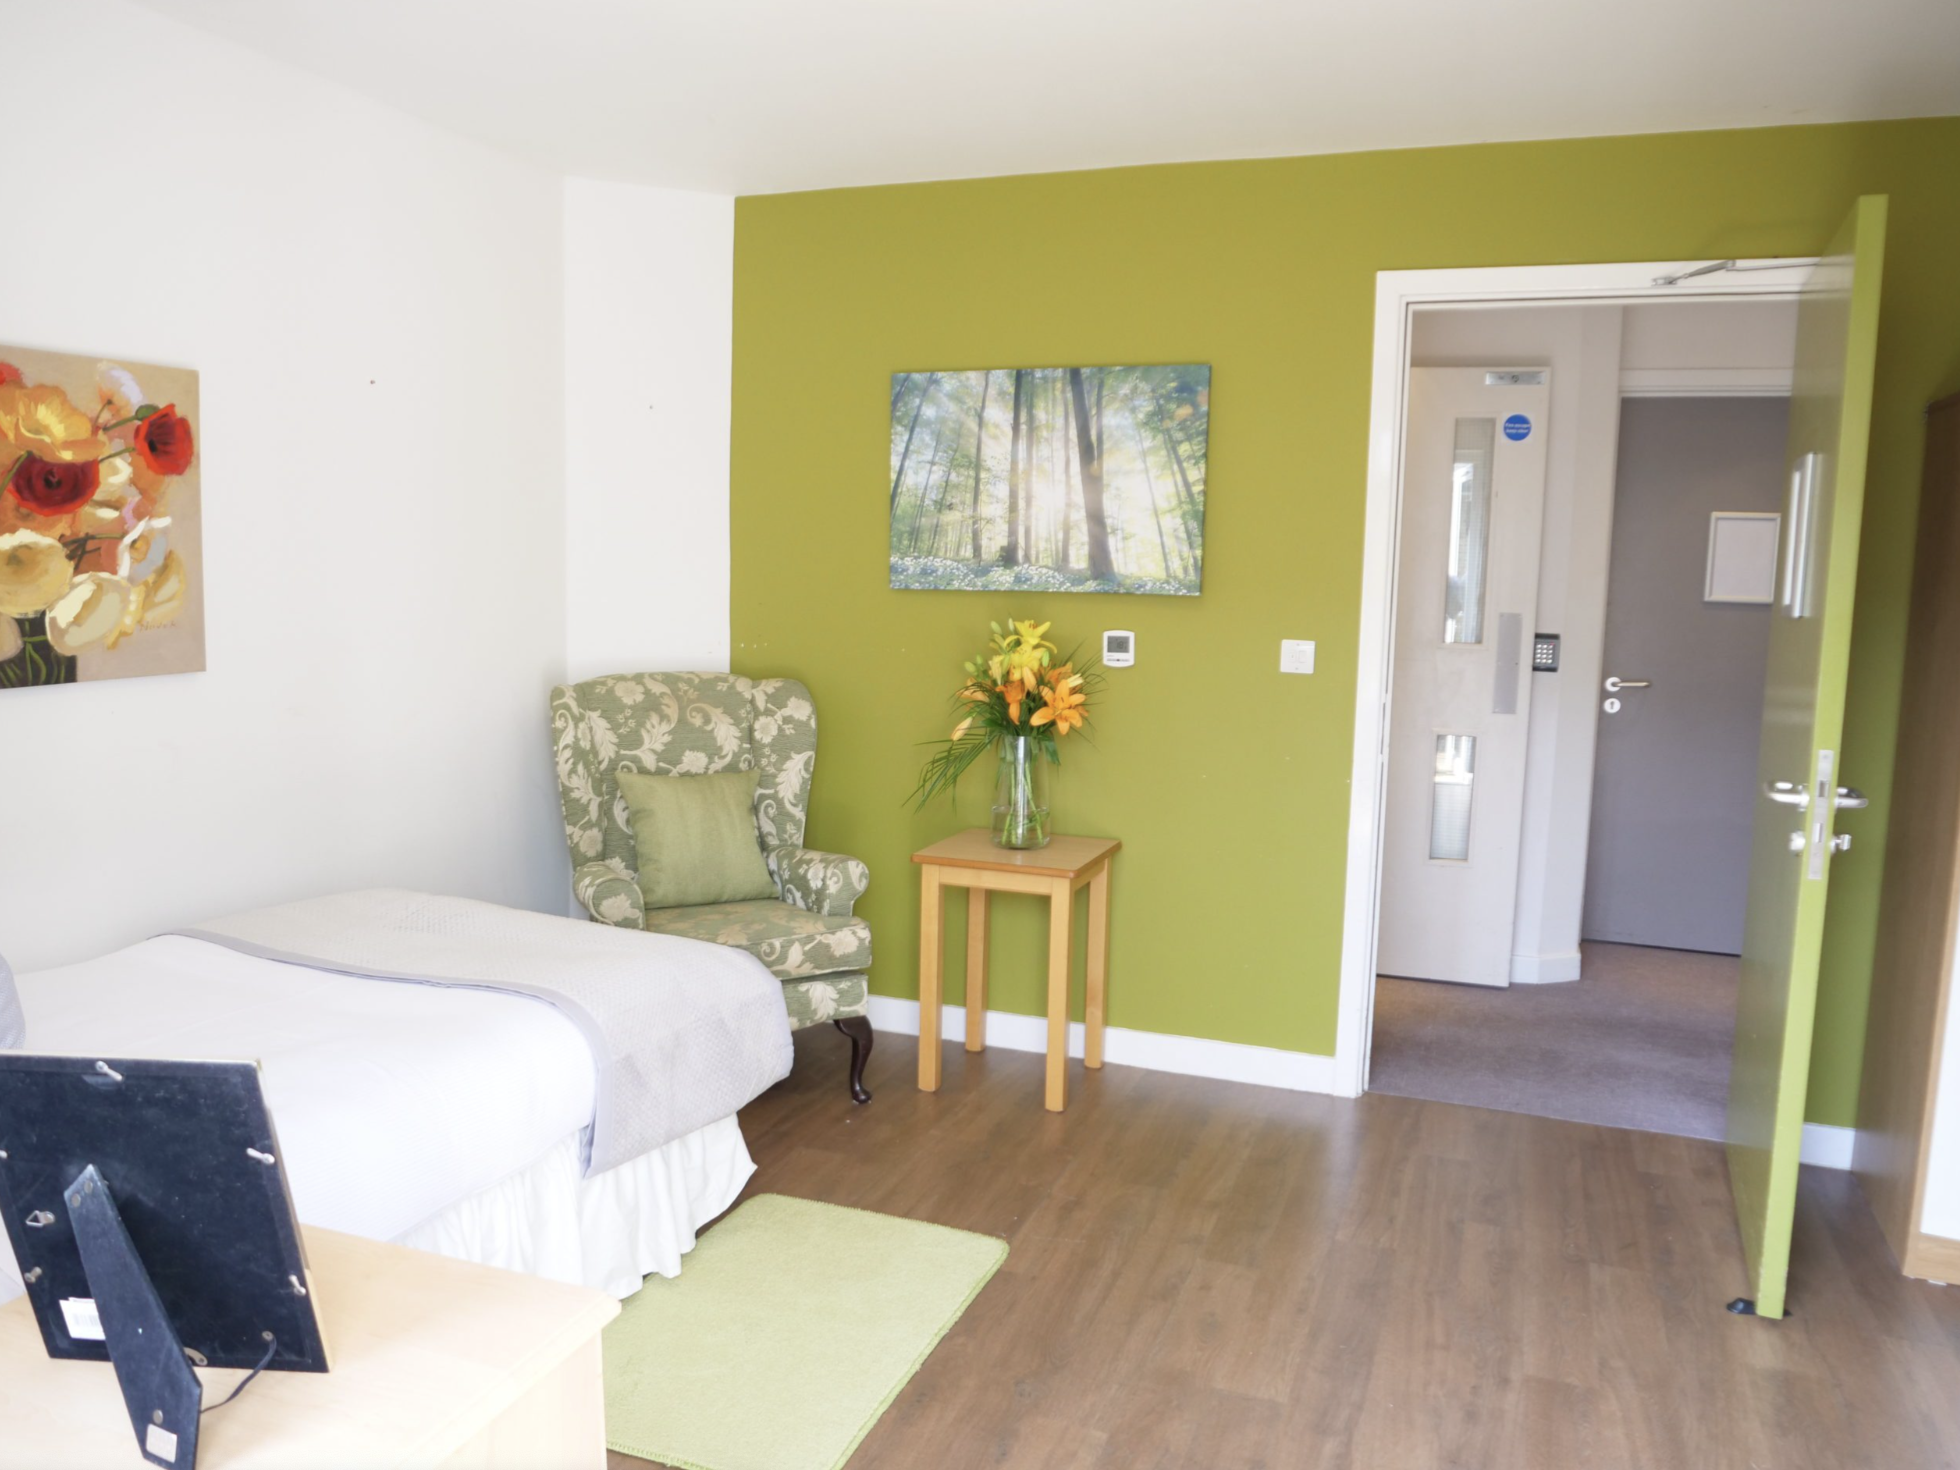 Bedroom of Hartley House care home in Cranbrook, Kent,